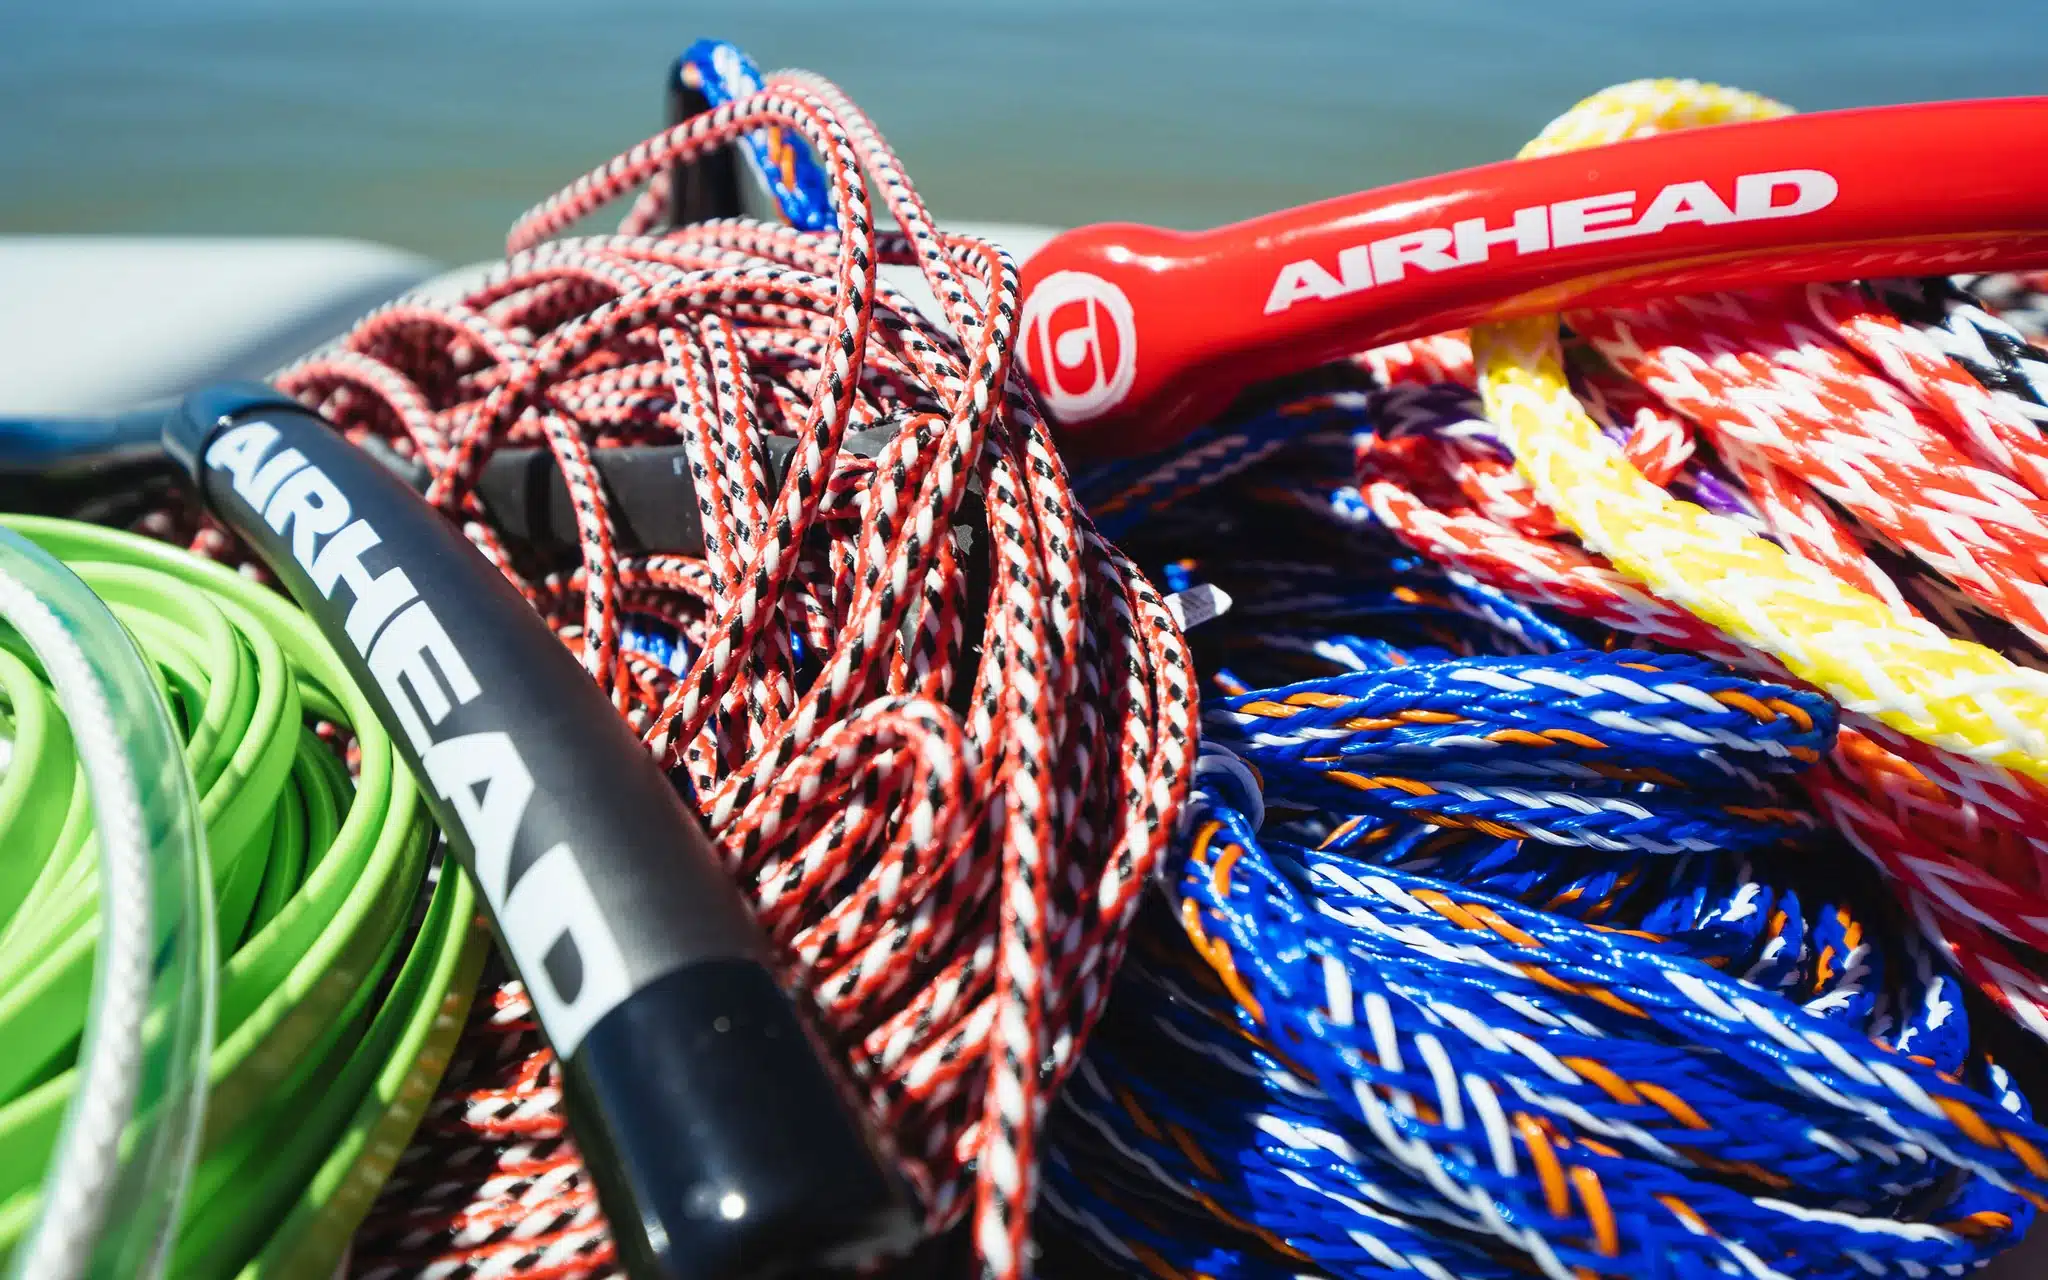 Airhead ski ropes with handles